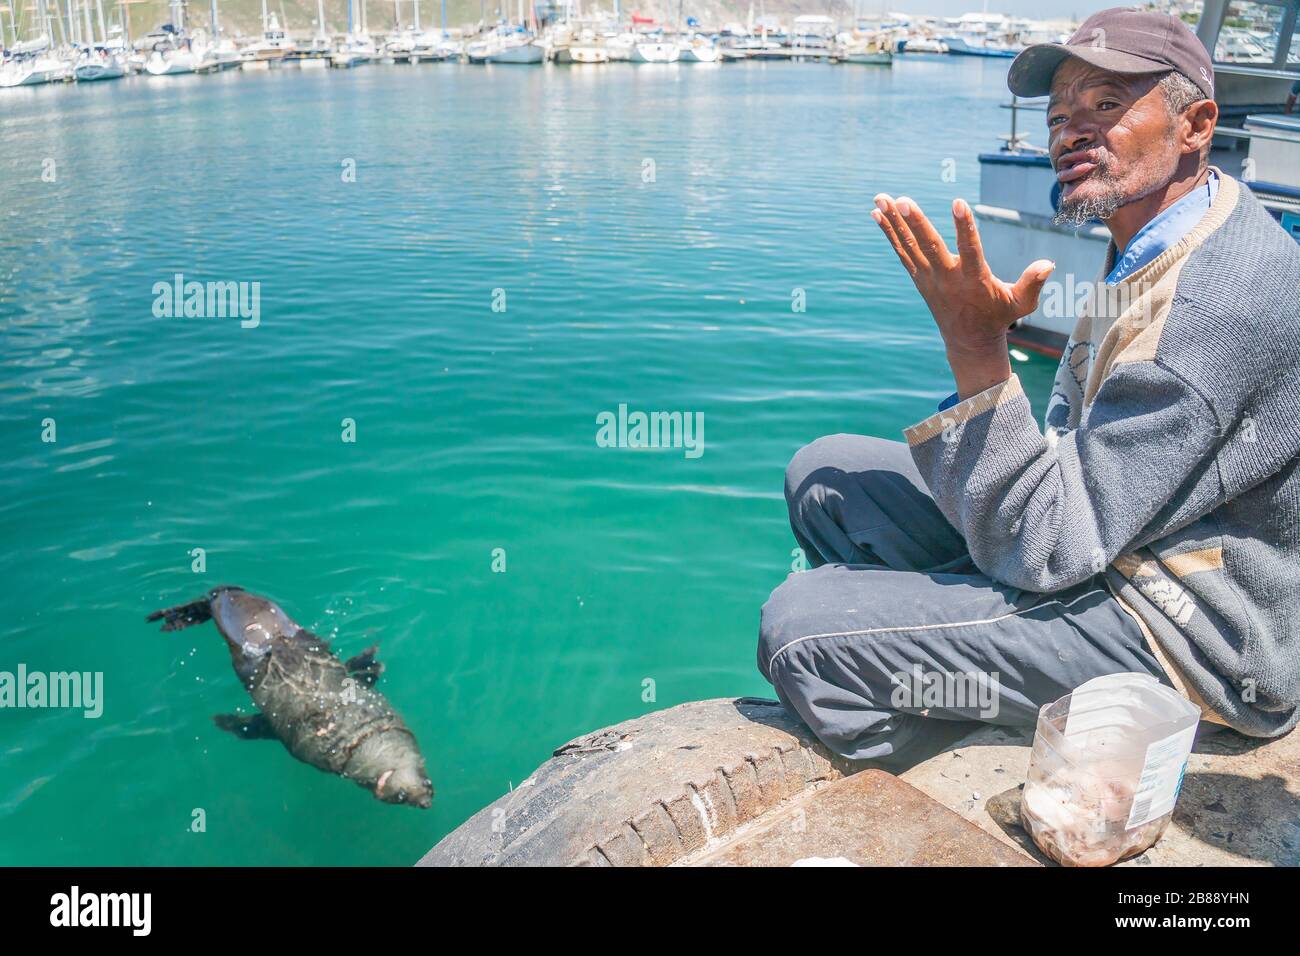 Hout bay, near Cape Town, South Africa - November 30, 2019 -a man feeds a seal in the harbour to attract tourists Stock Photo